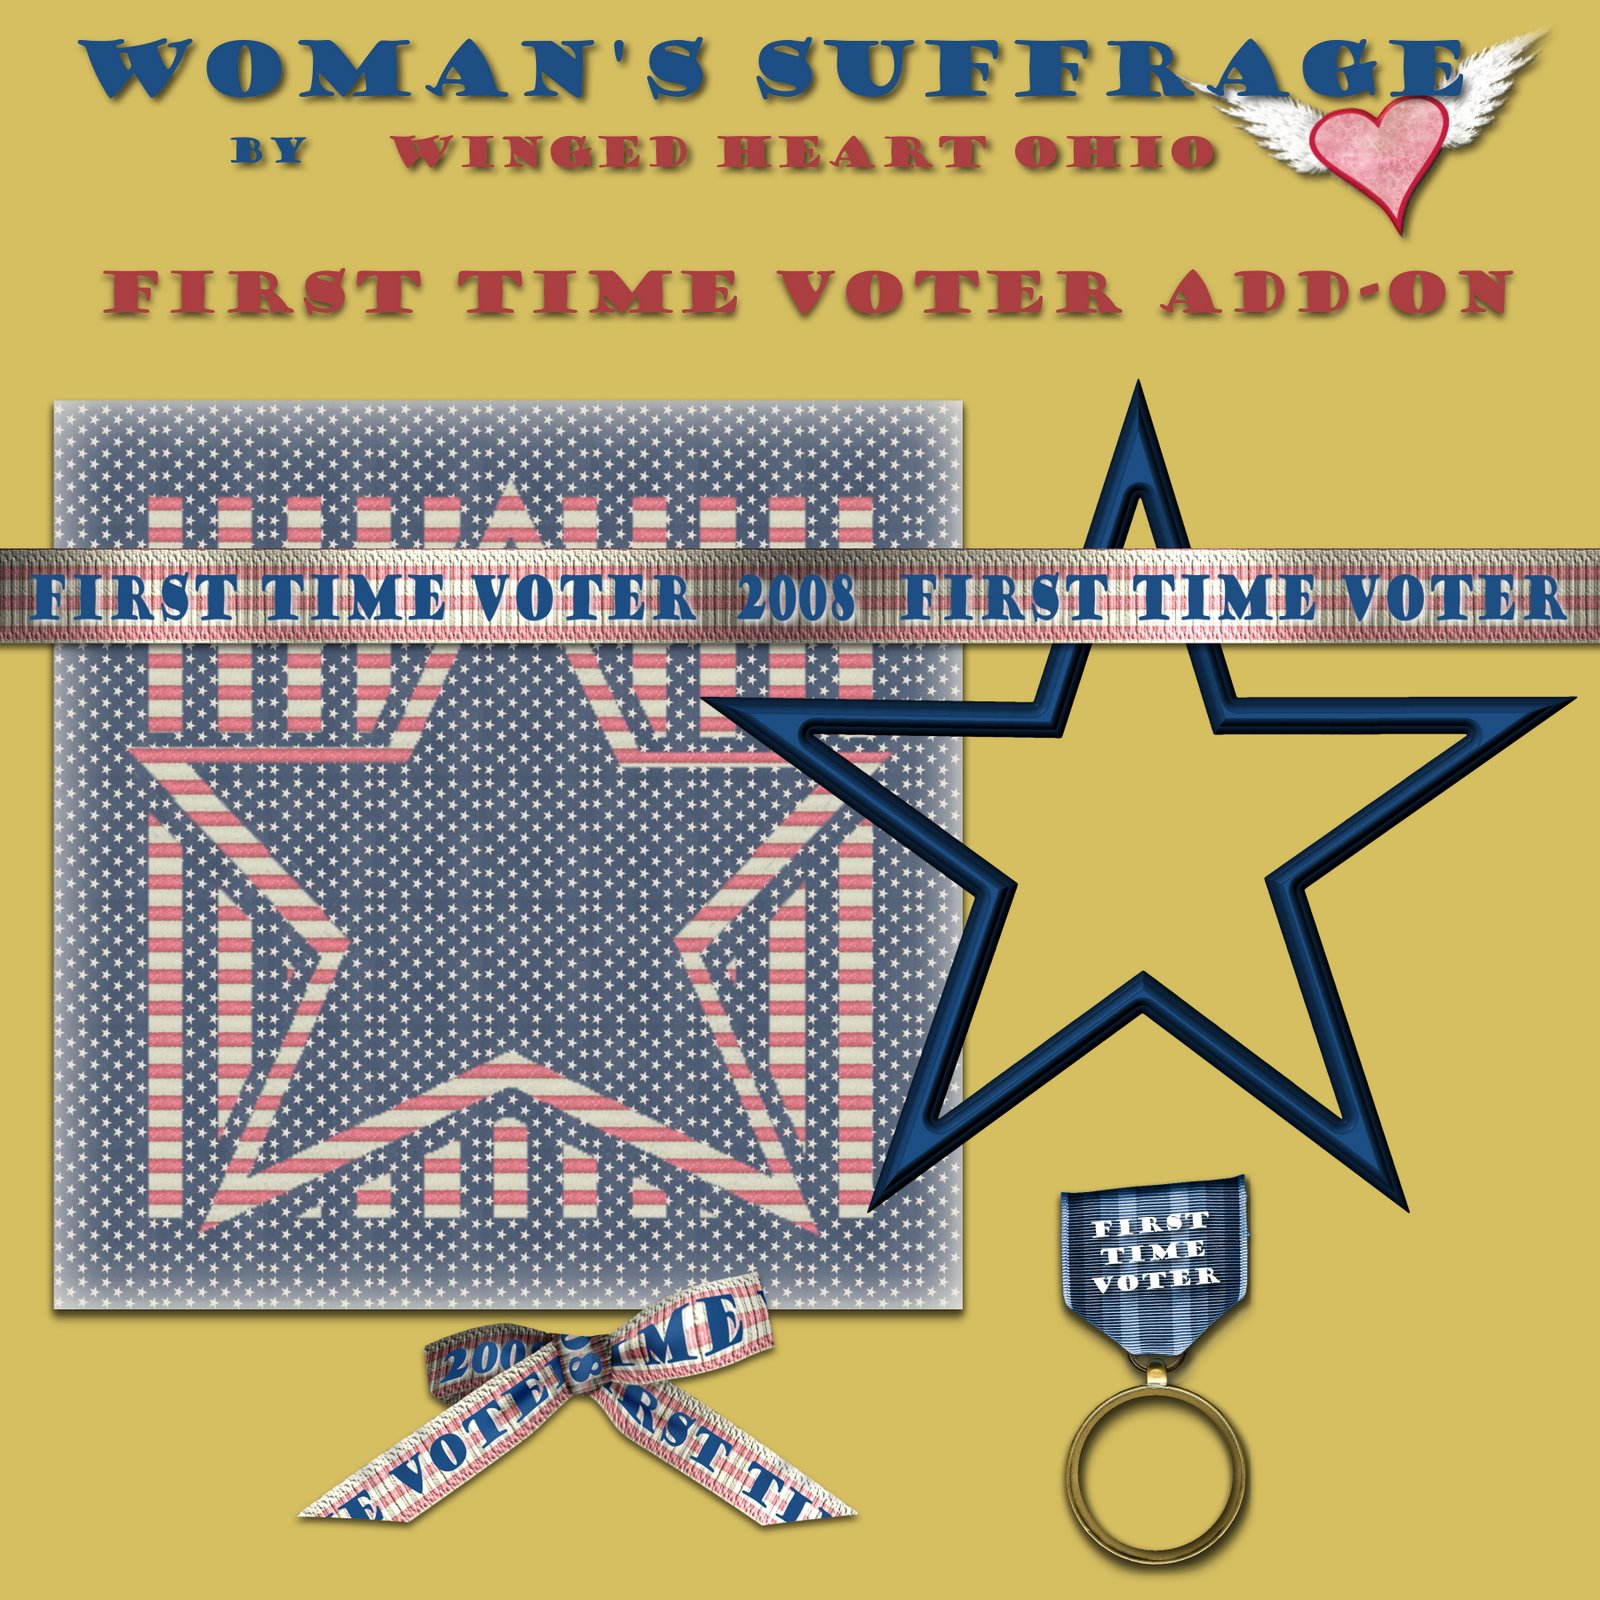 [WH_SuffrageAO_Preview.jpg]